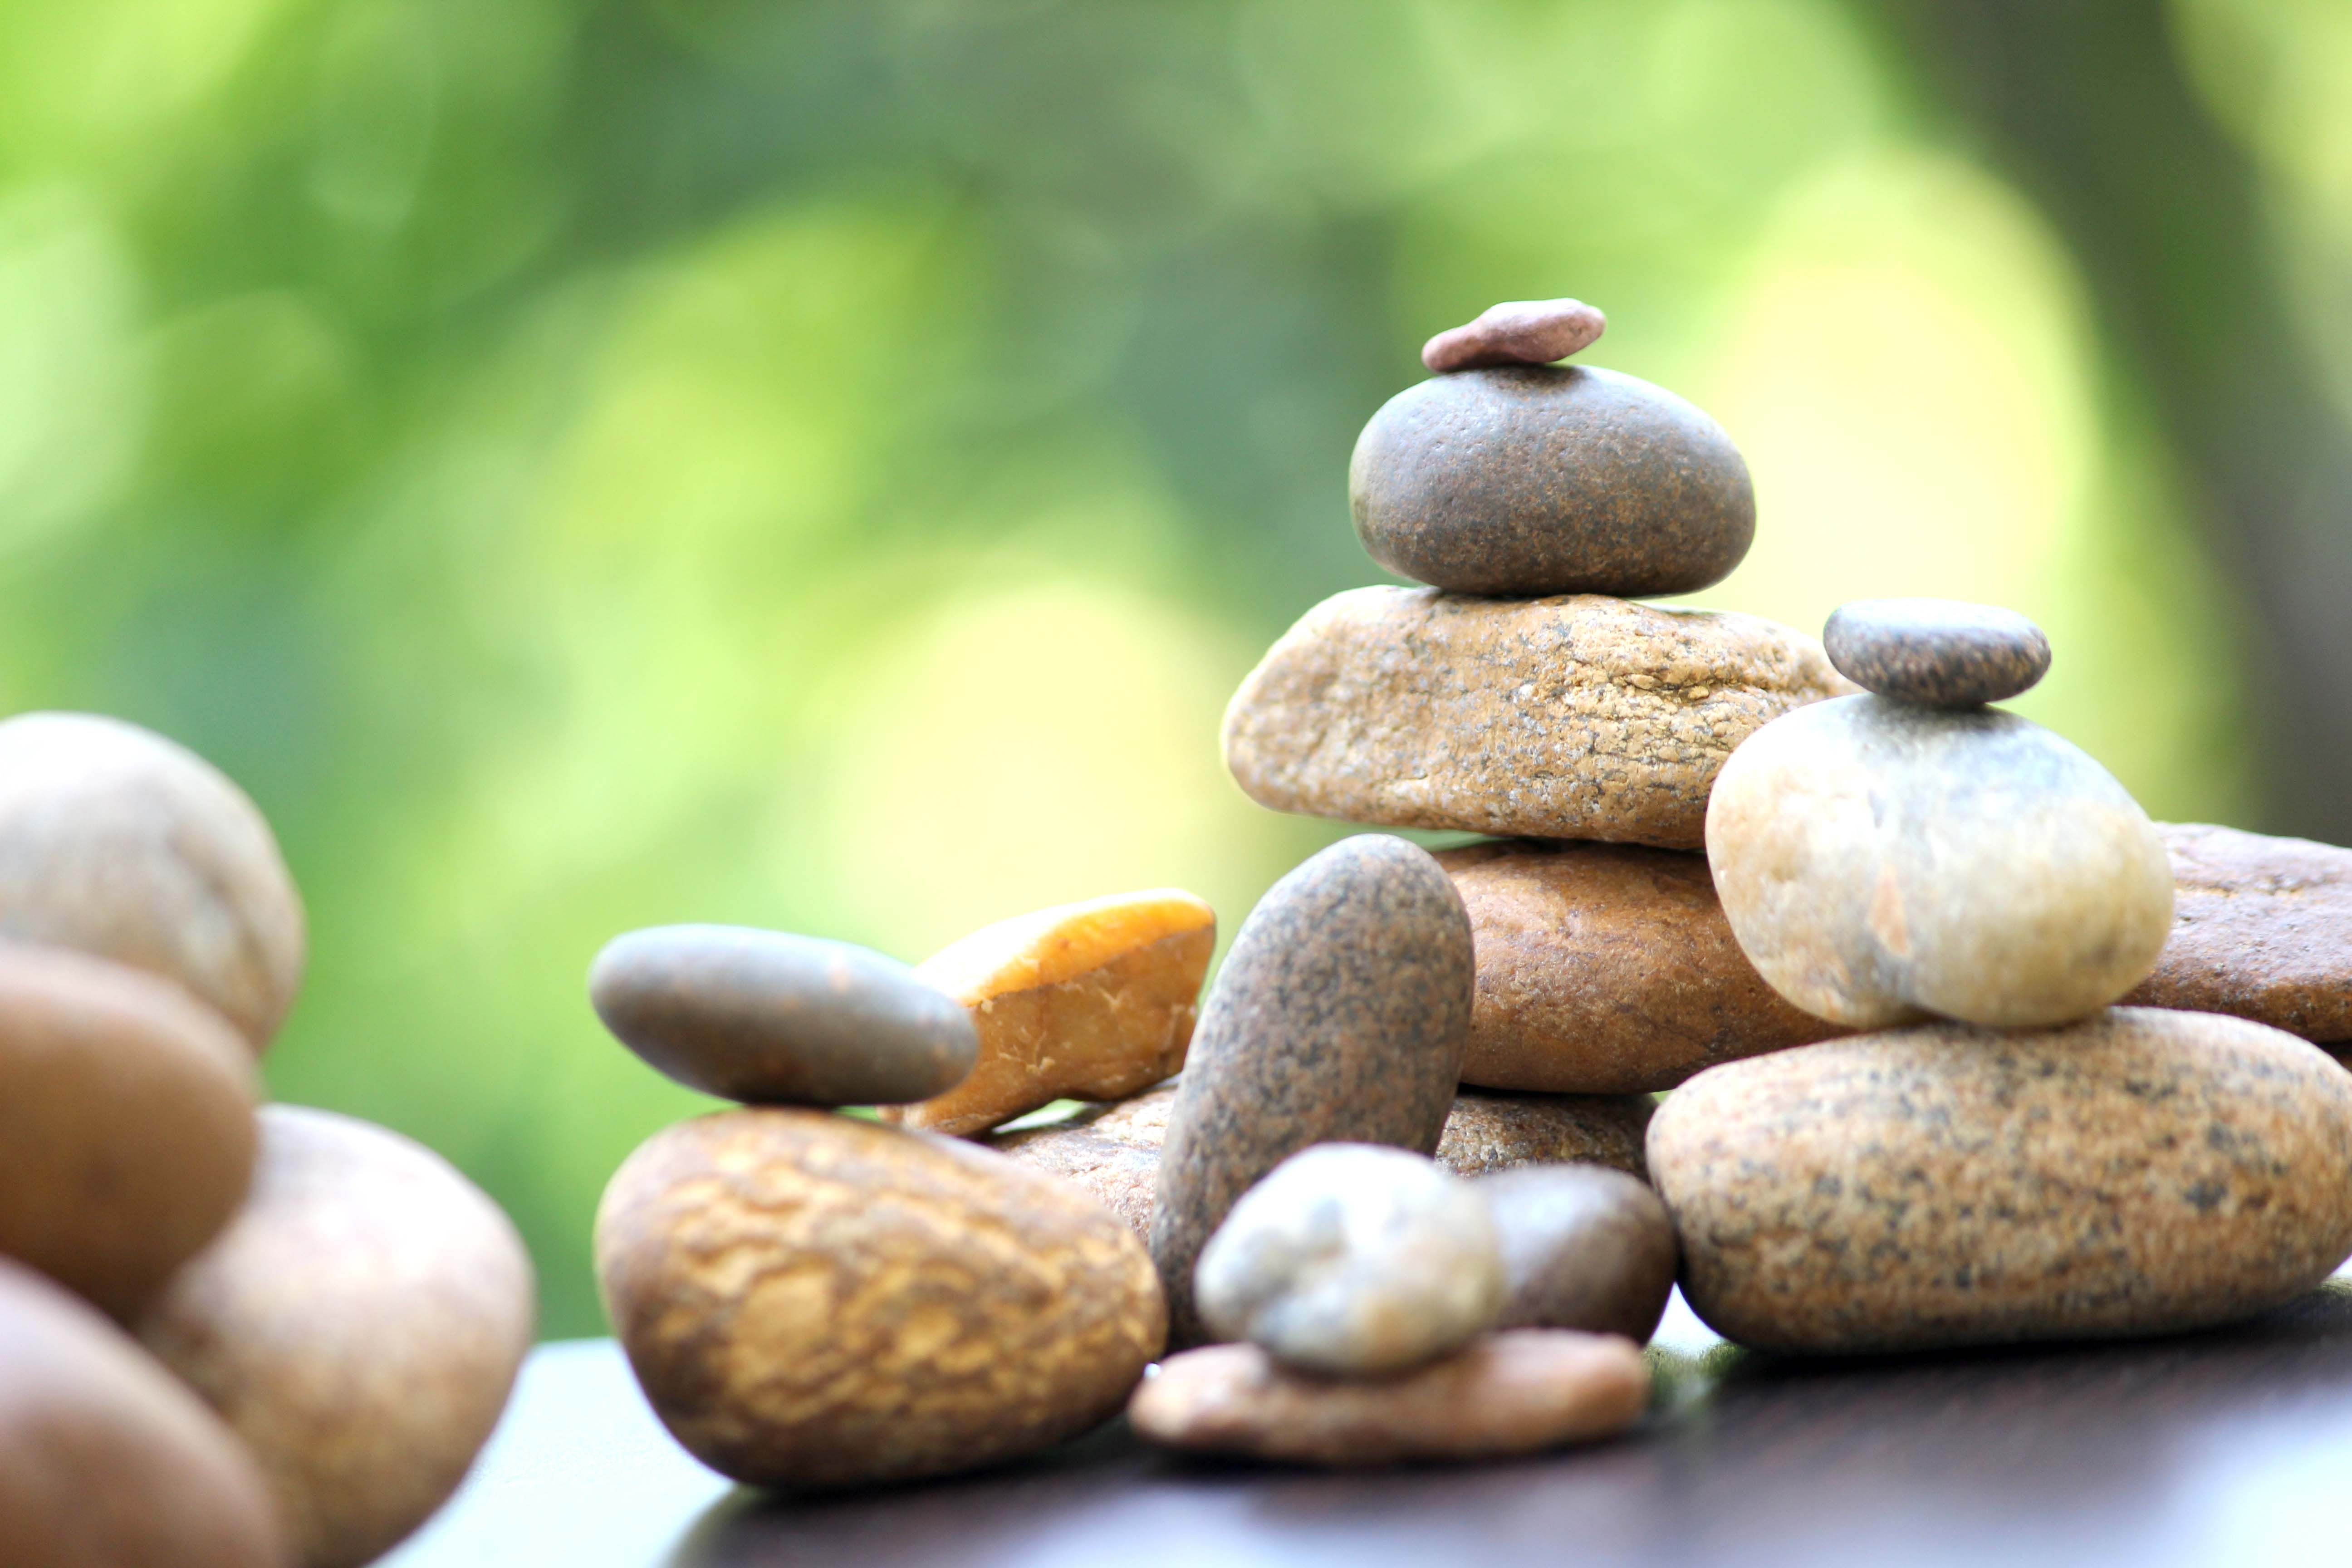 Bunch of Stones grouped together. Beach stones wallpaper | Royalty ...